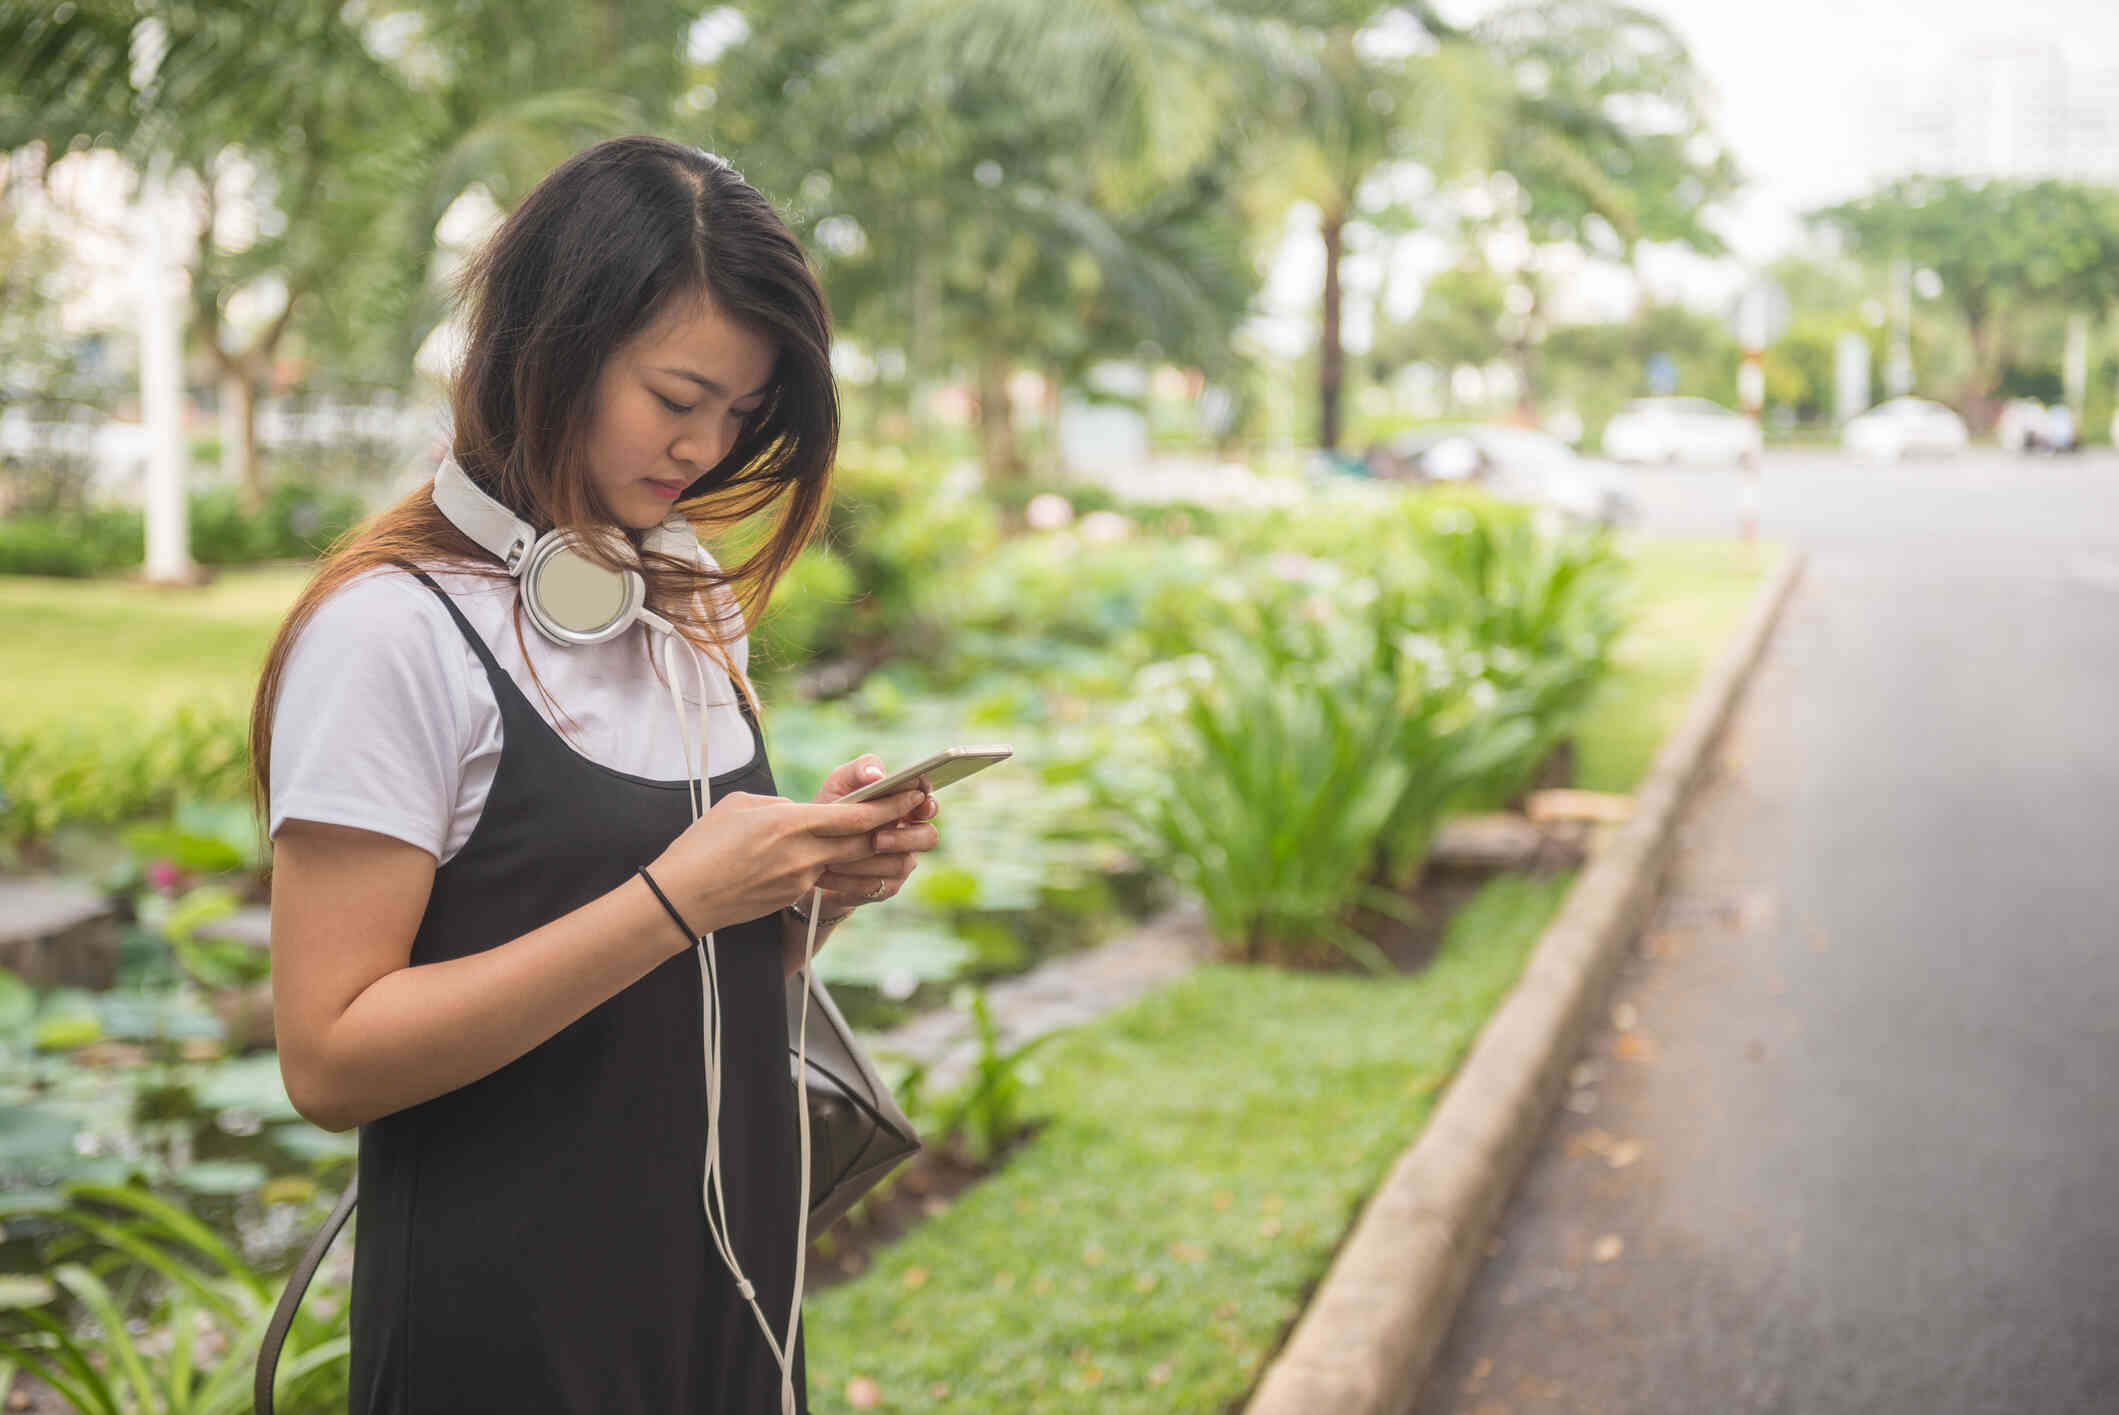 A teen girl in a black dress and white headphones stands outside and looks at the cellphone in her hands.